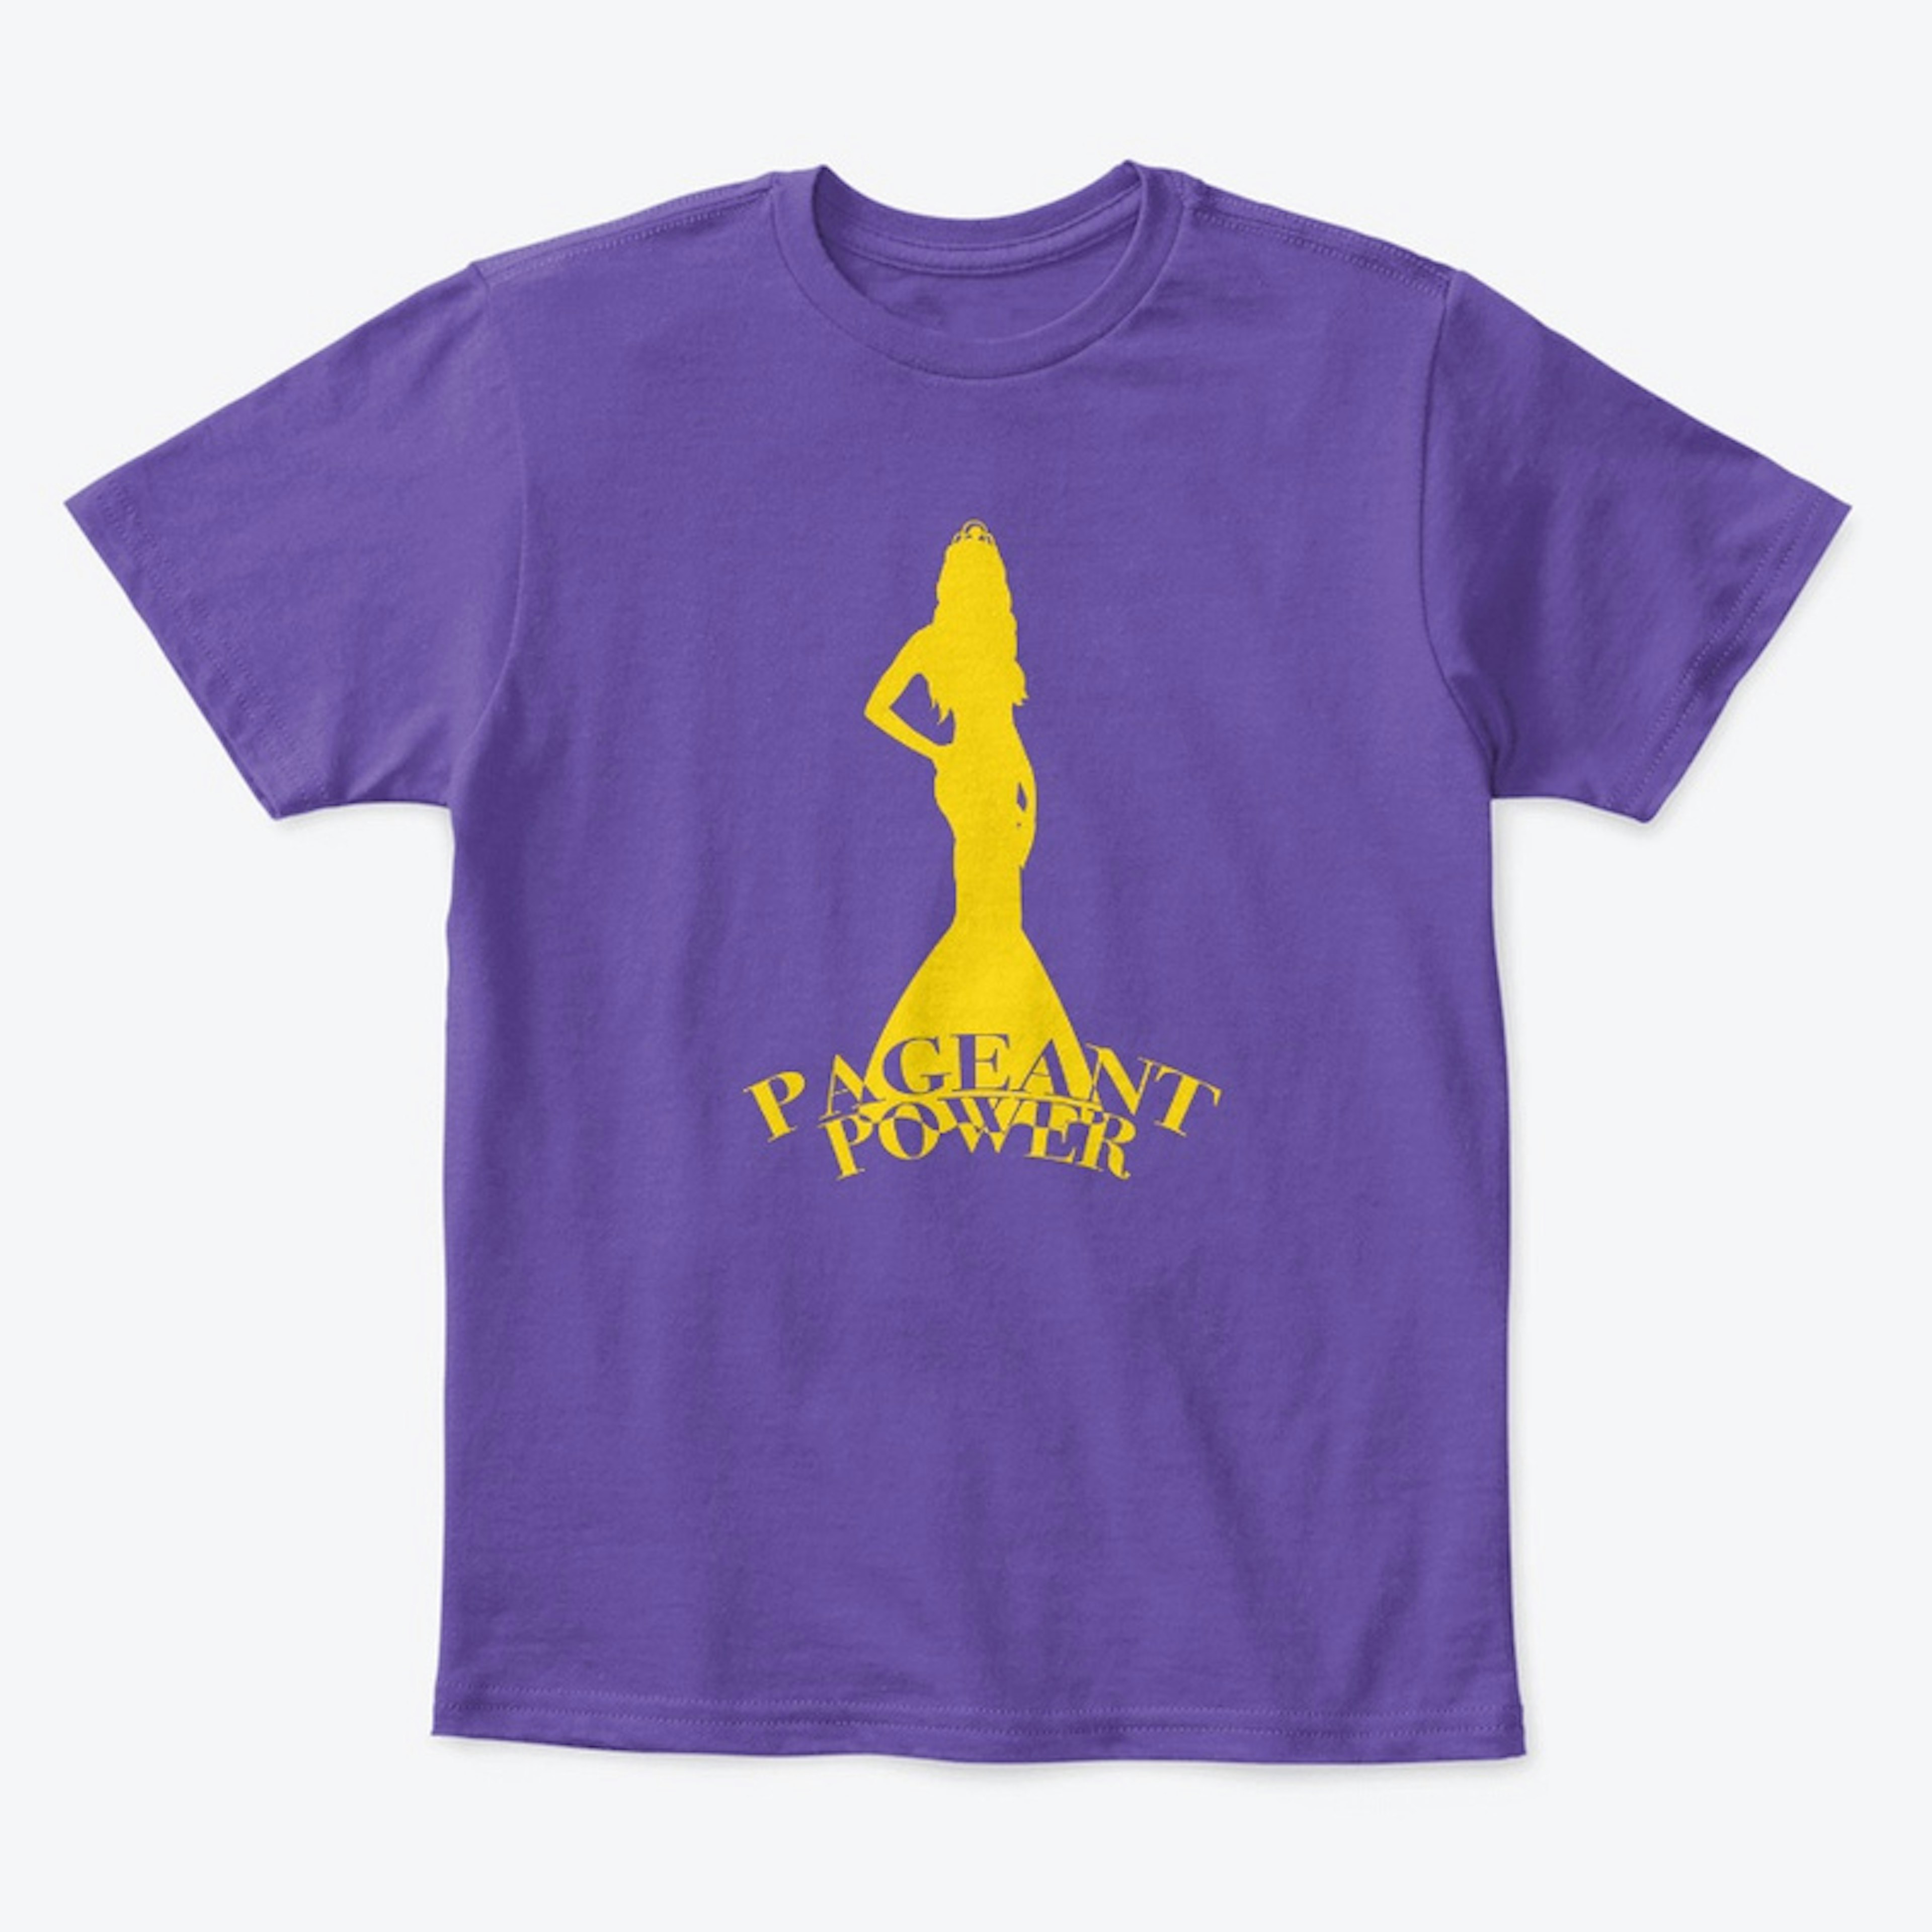 Pageant Power Kids Tee g